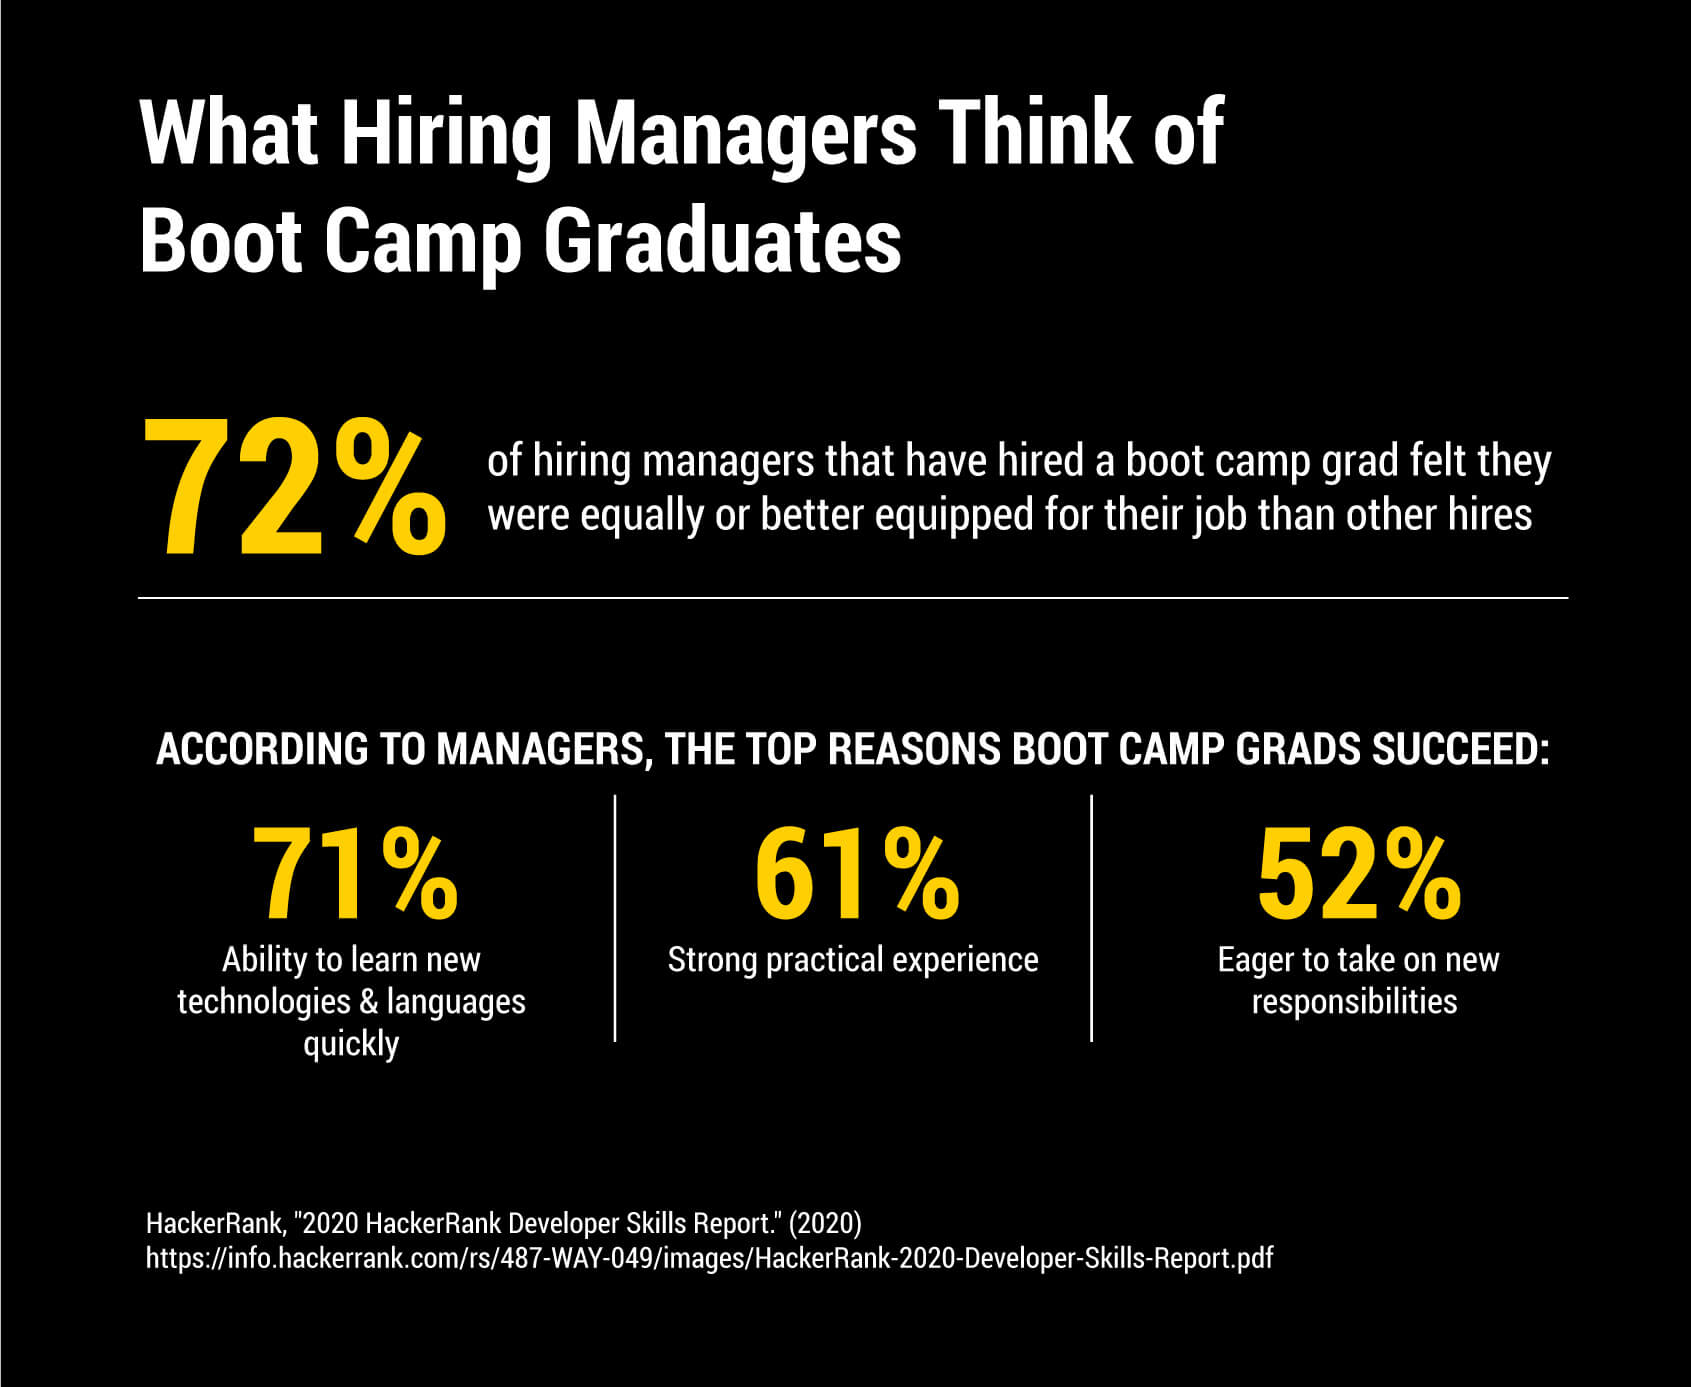 Statistics that show what hiring managers think of boot camp graduates